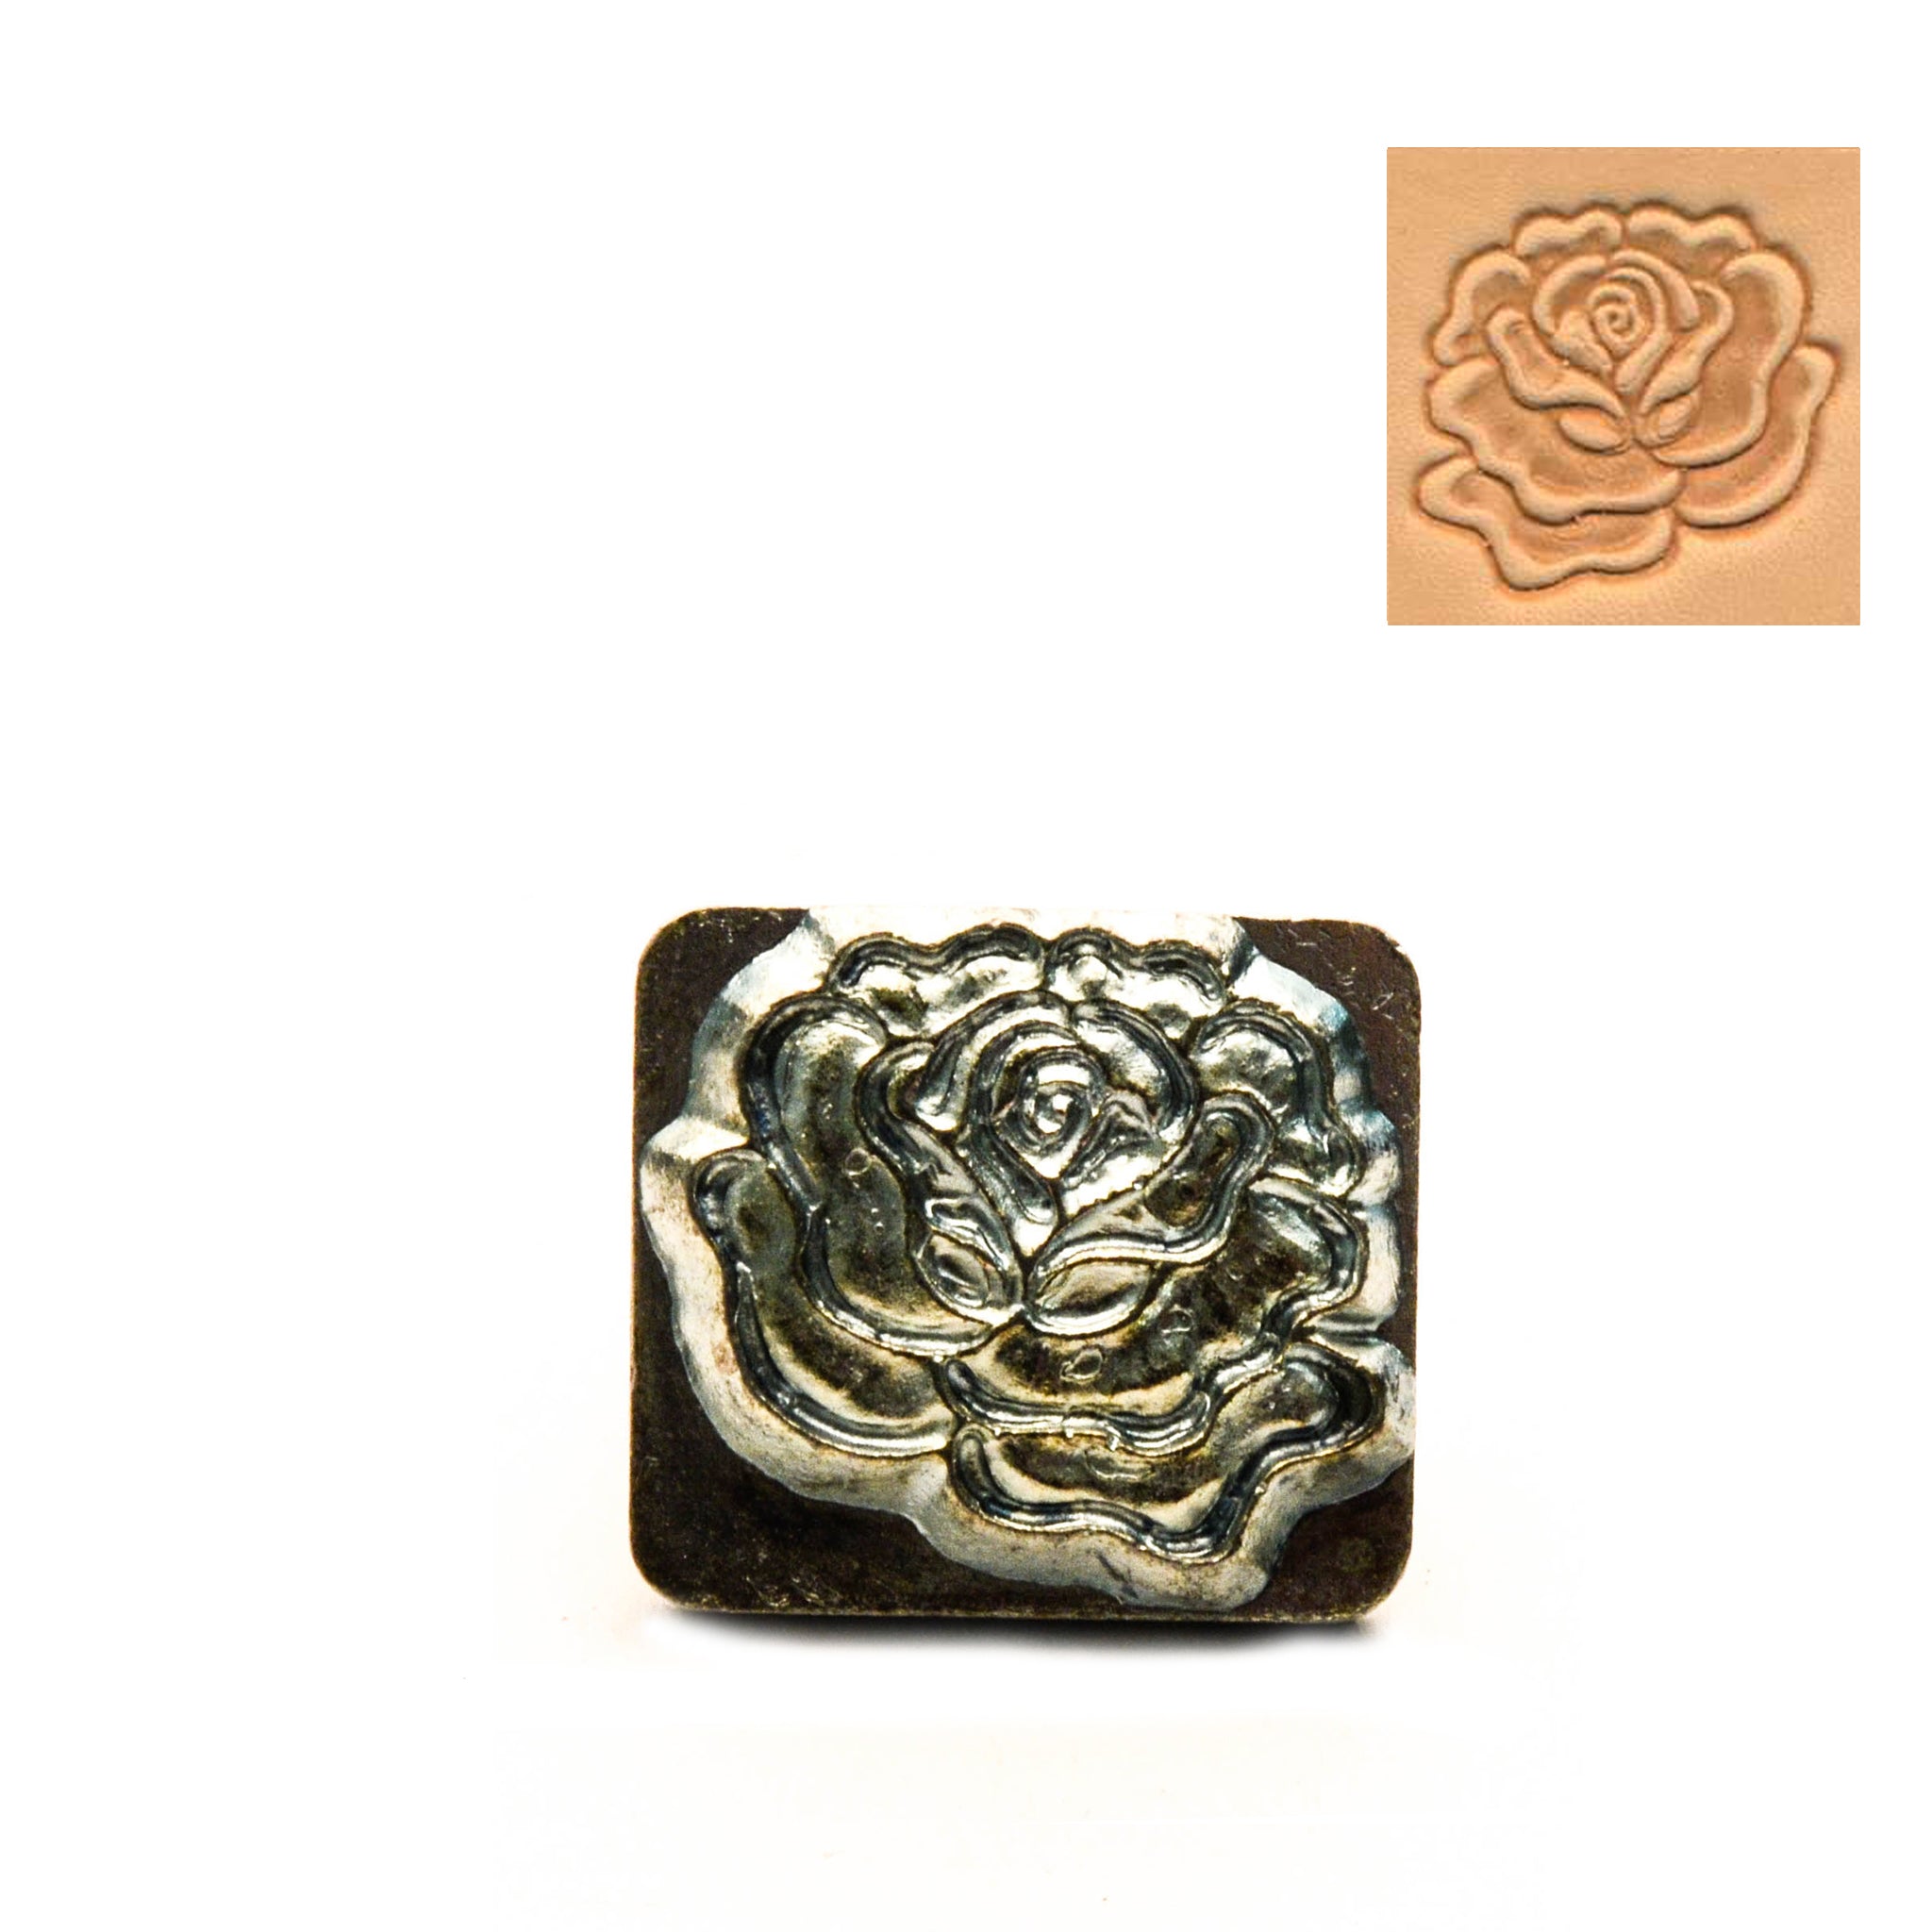 Rose 3D Embossing Stamp from Identity Leathercraft